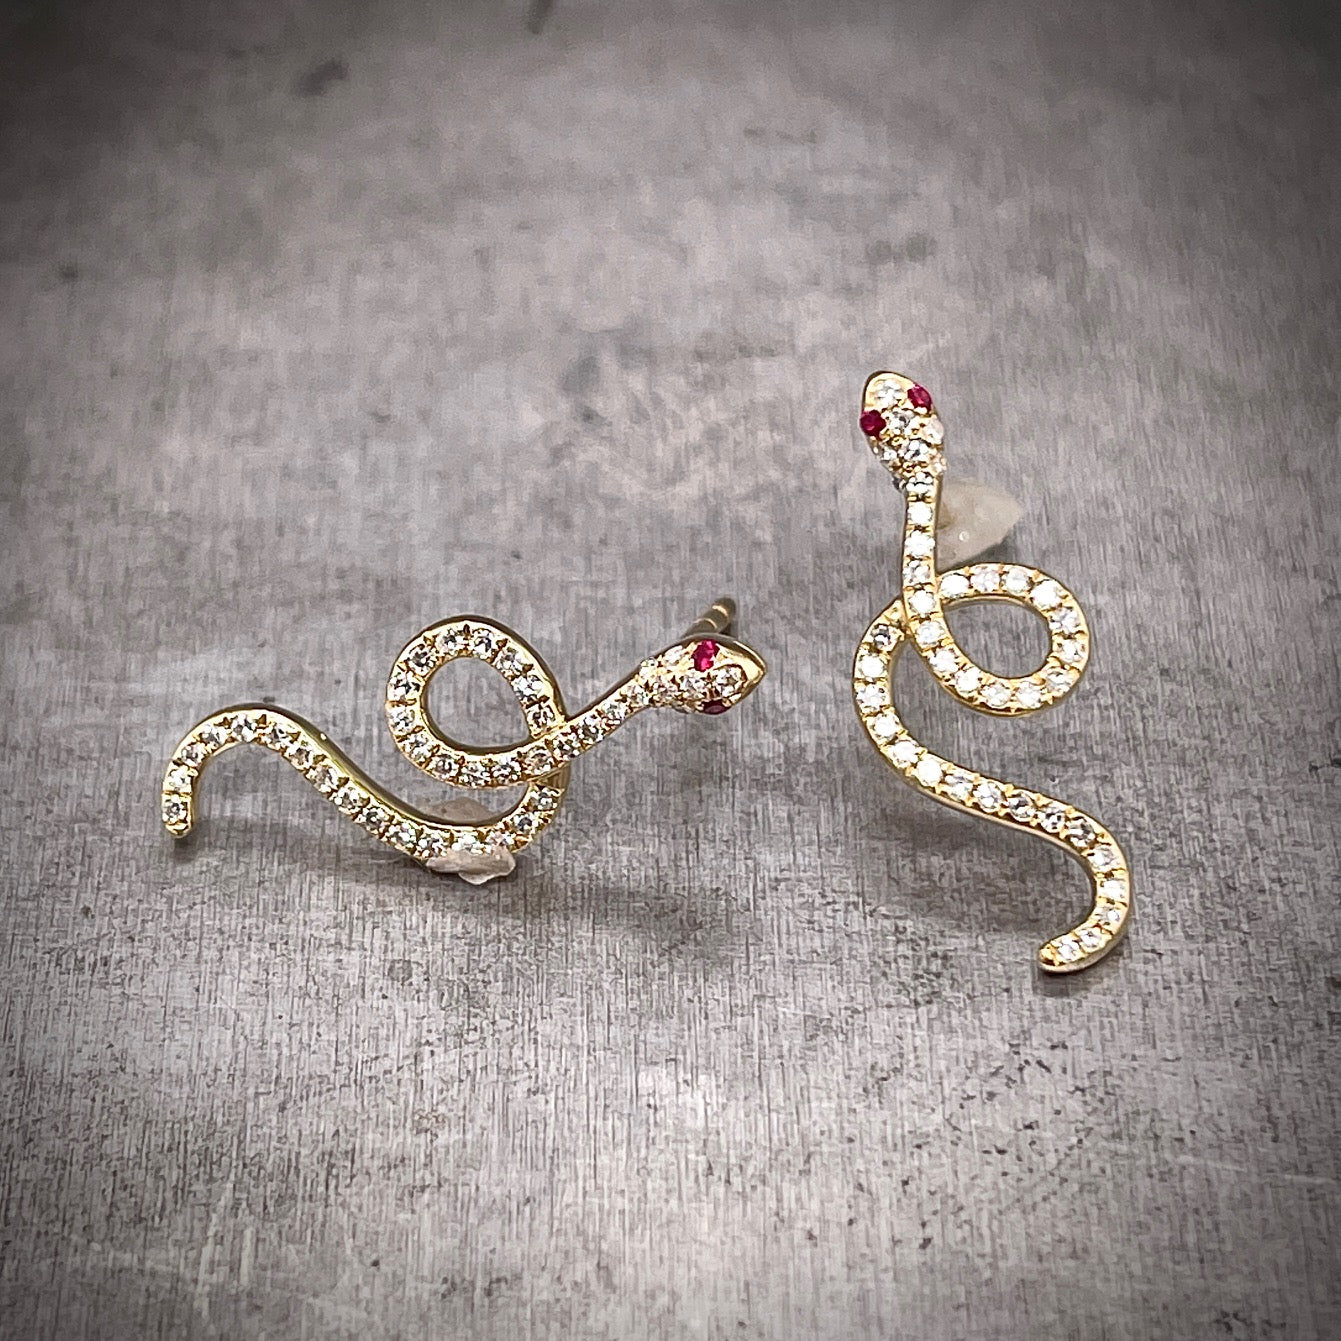 Front View of Diamond and Yellow Gold Snake Earrings with Ruby Accents